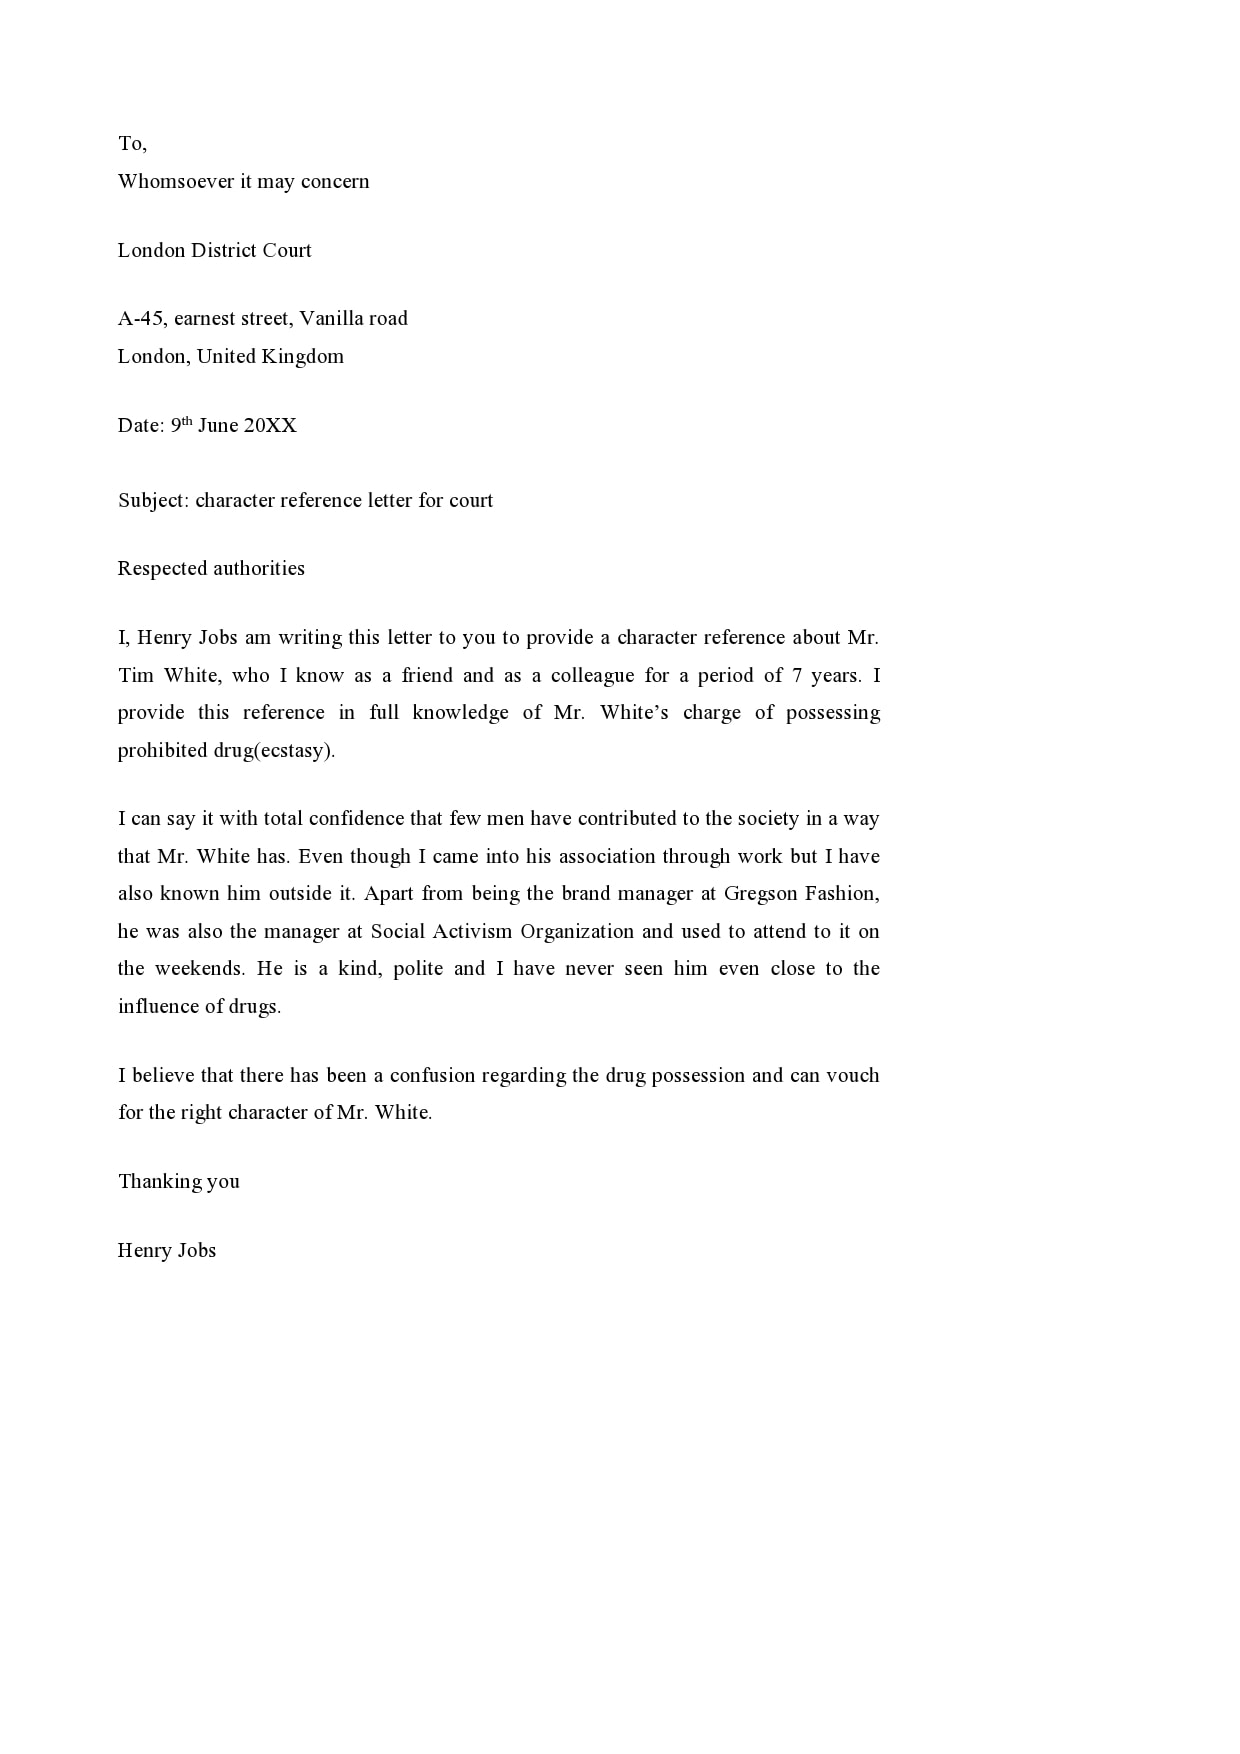 Sample Reference Letter For A Friend from templatearchive.com